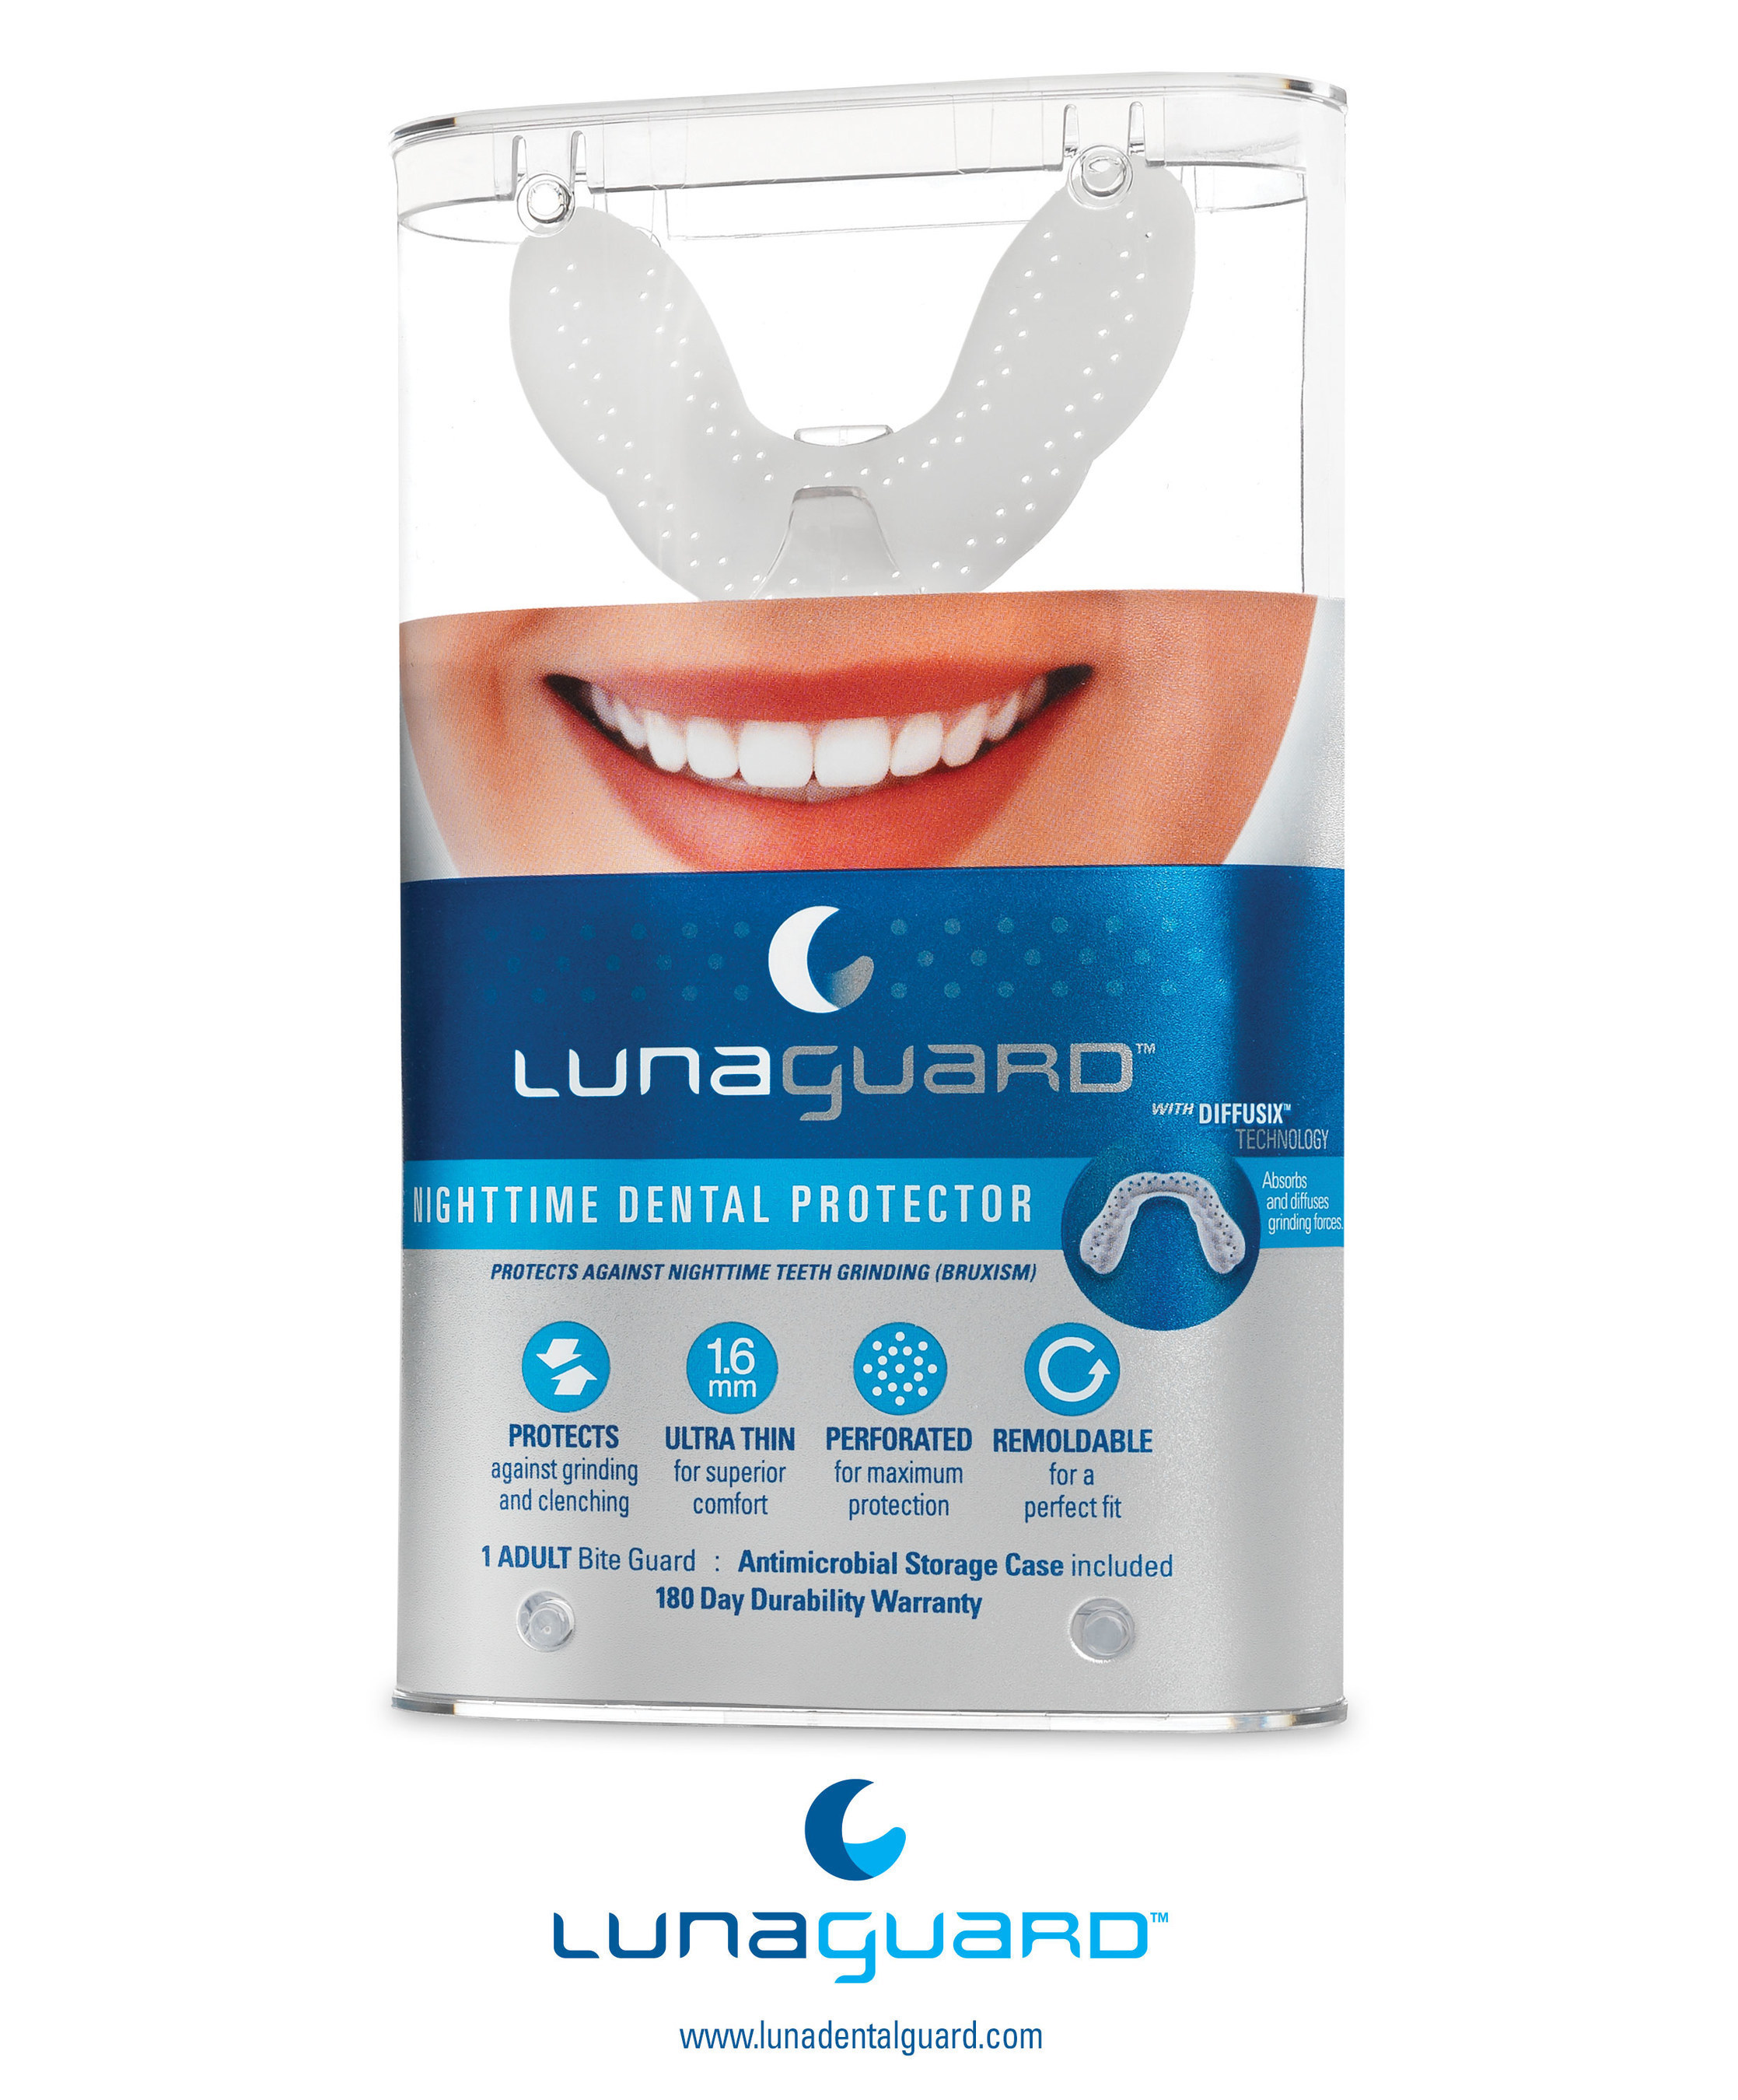 The LunaGuard(TM) Nighttime Dental Protector is a bite guard that provides better protection than conventional nighttime bite guards due to its unique design and materials. It is made of a strong thermoplastic that prevents the user from biting through the guard. Engineering tests show the LunaGuard(TM) provides up to 30% better protection than conventional nighttime bite guards. This is significant since the LunaGuard(TM) is only 1.6 mm thick. Additionally, tests show that the LunaGuard(TM) offers 90% more force absorption and is 8x tougher than other available bite guards.